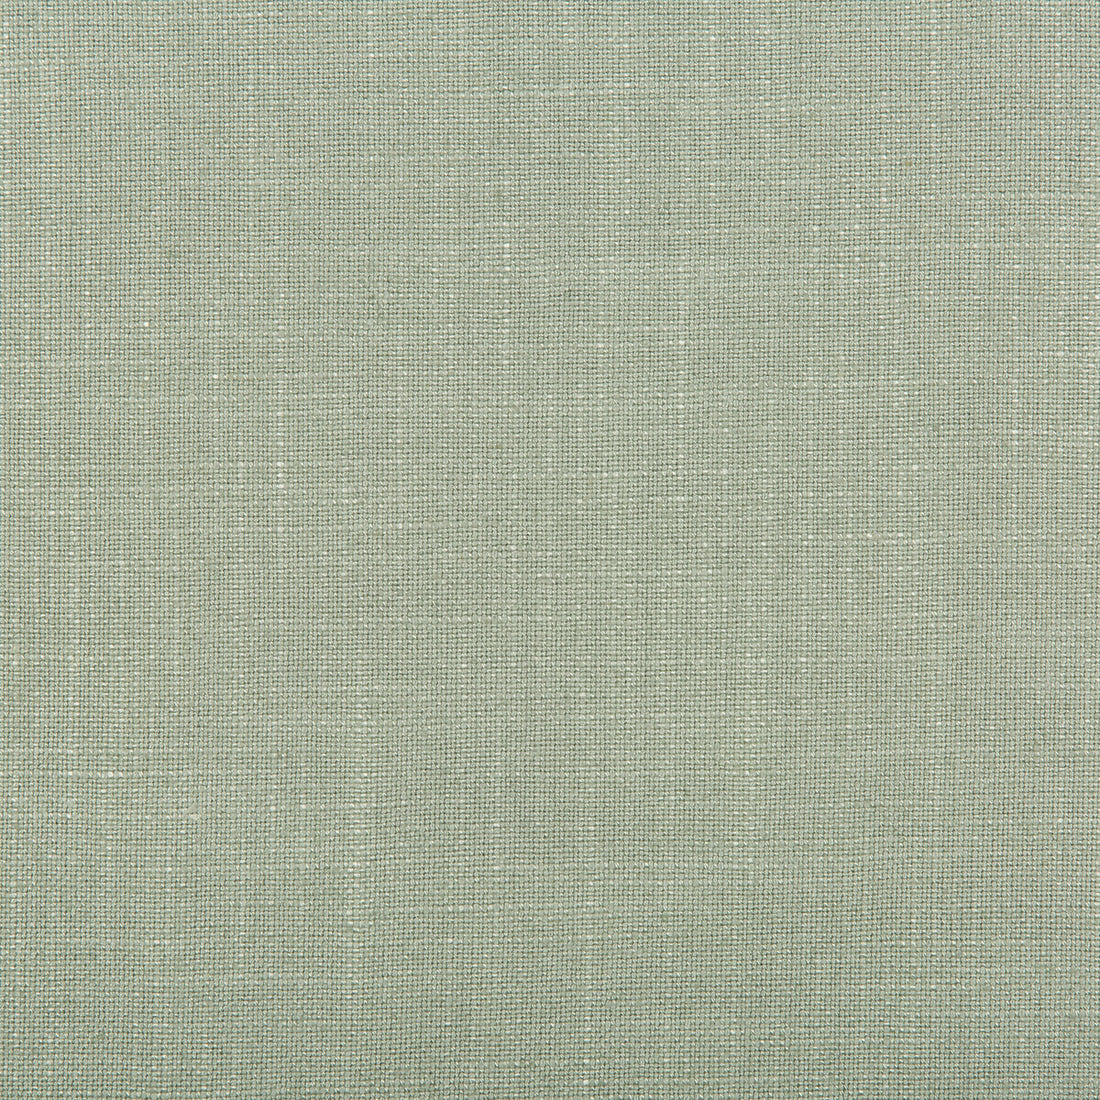 Aura fabric in mineral color - pattern 35520.323.0 - by Kravet Design